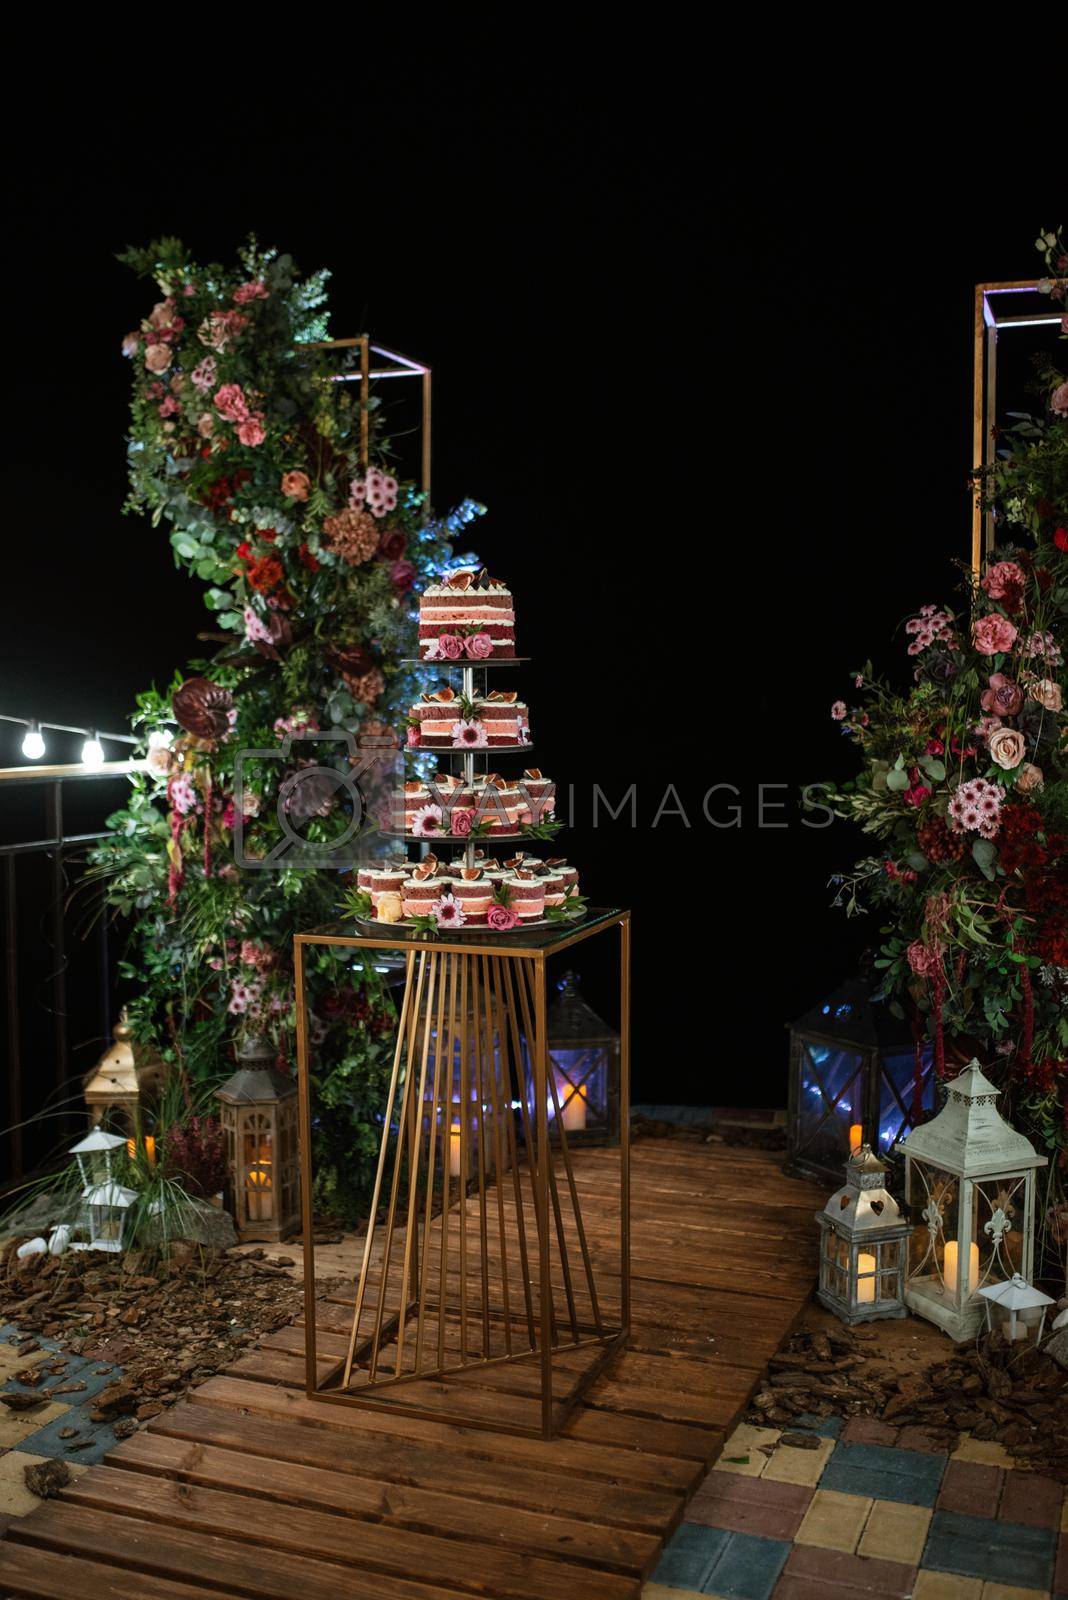 Royalty free image of wedding cake at the wedding by Andreua